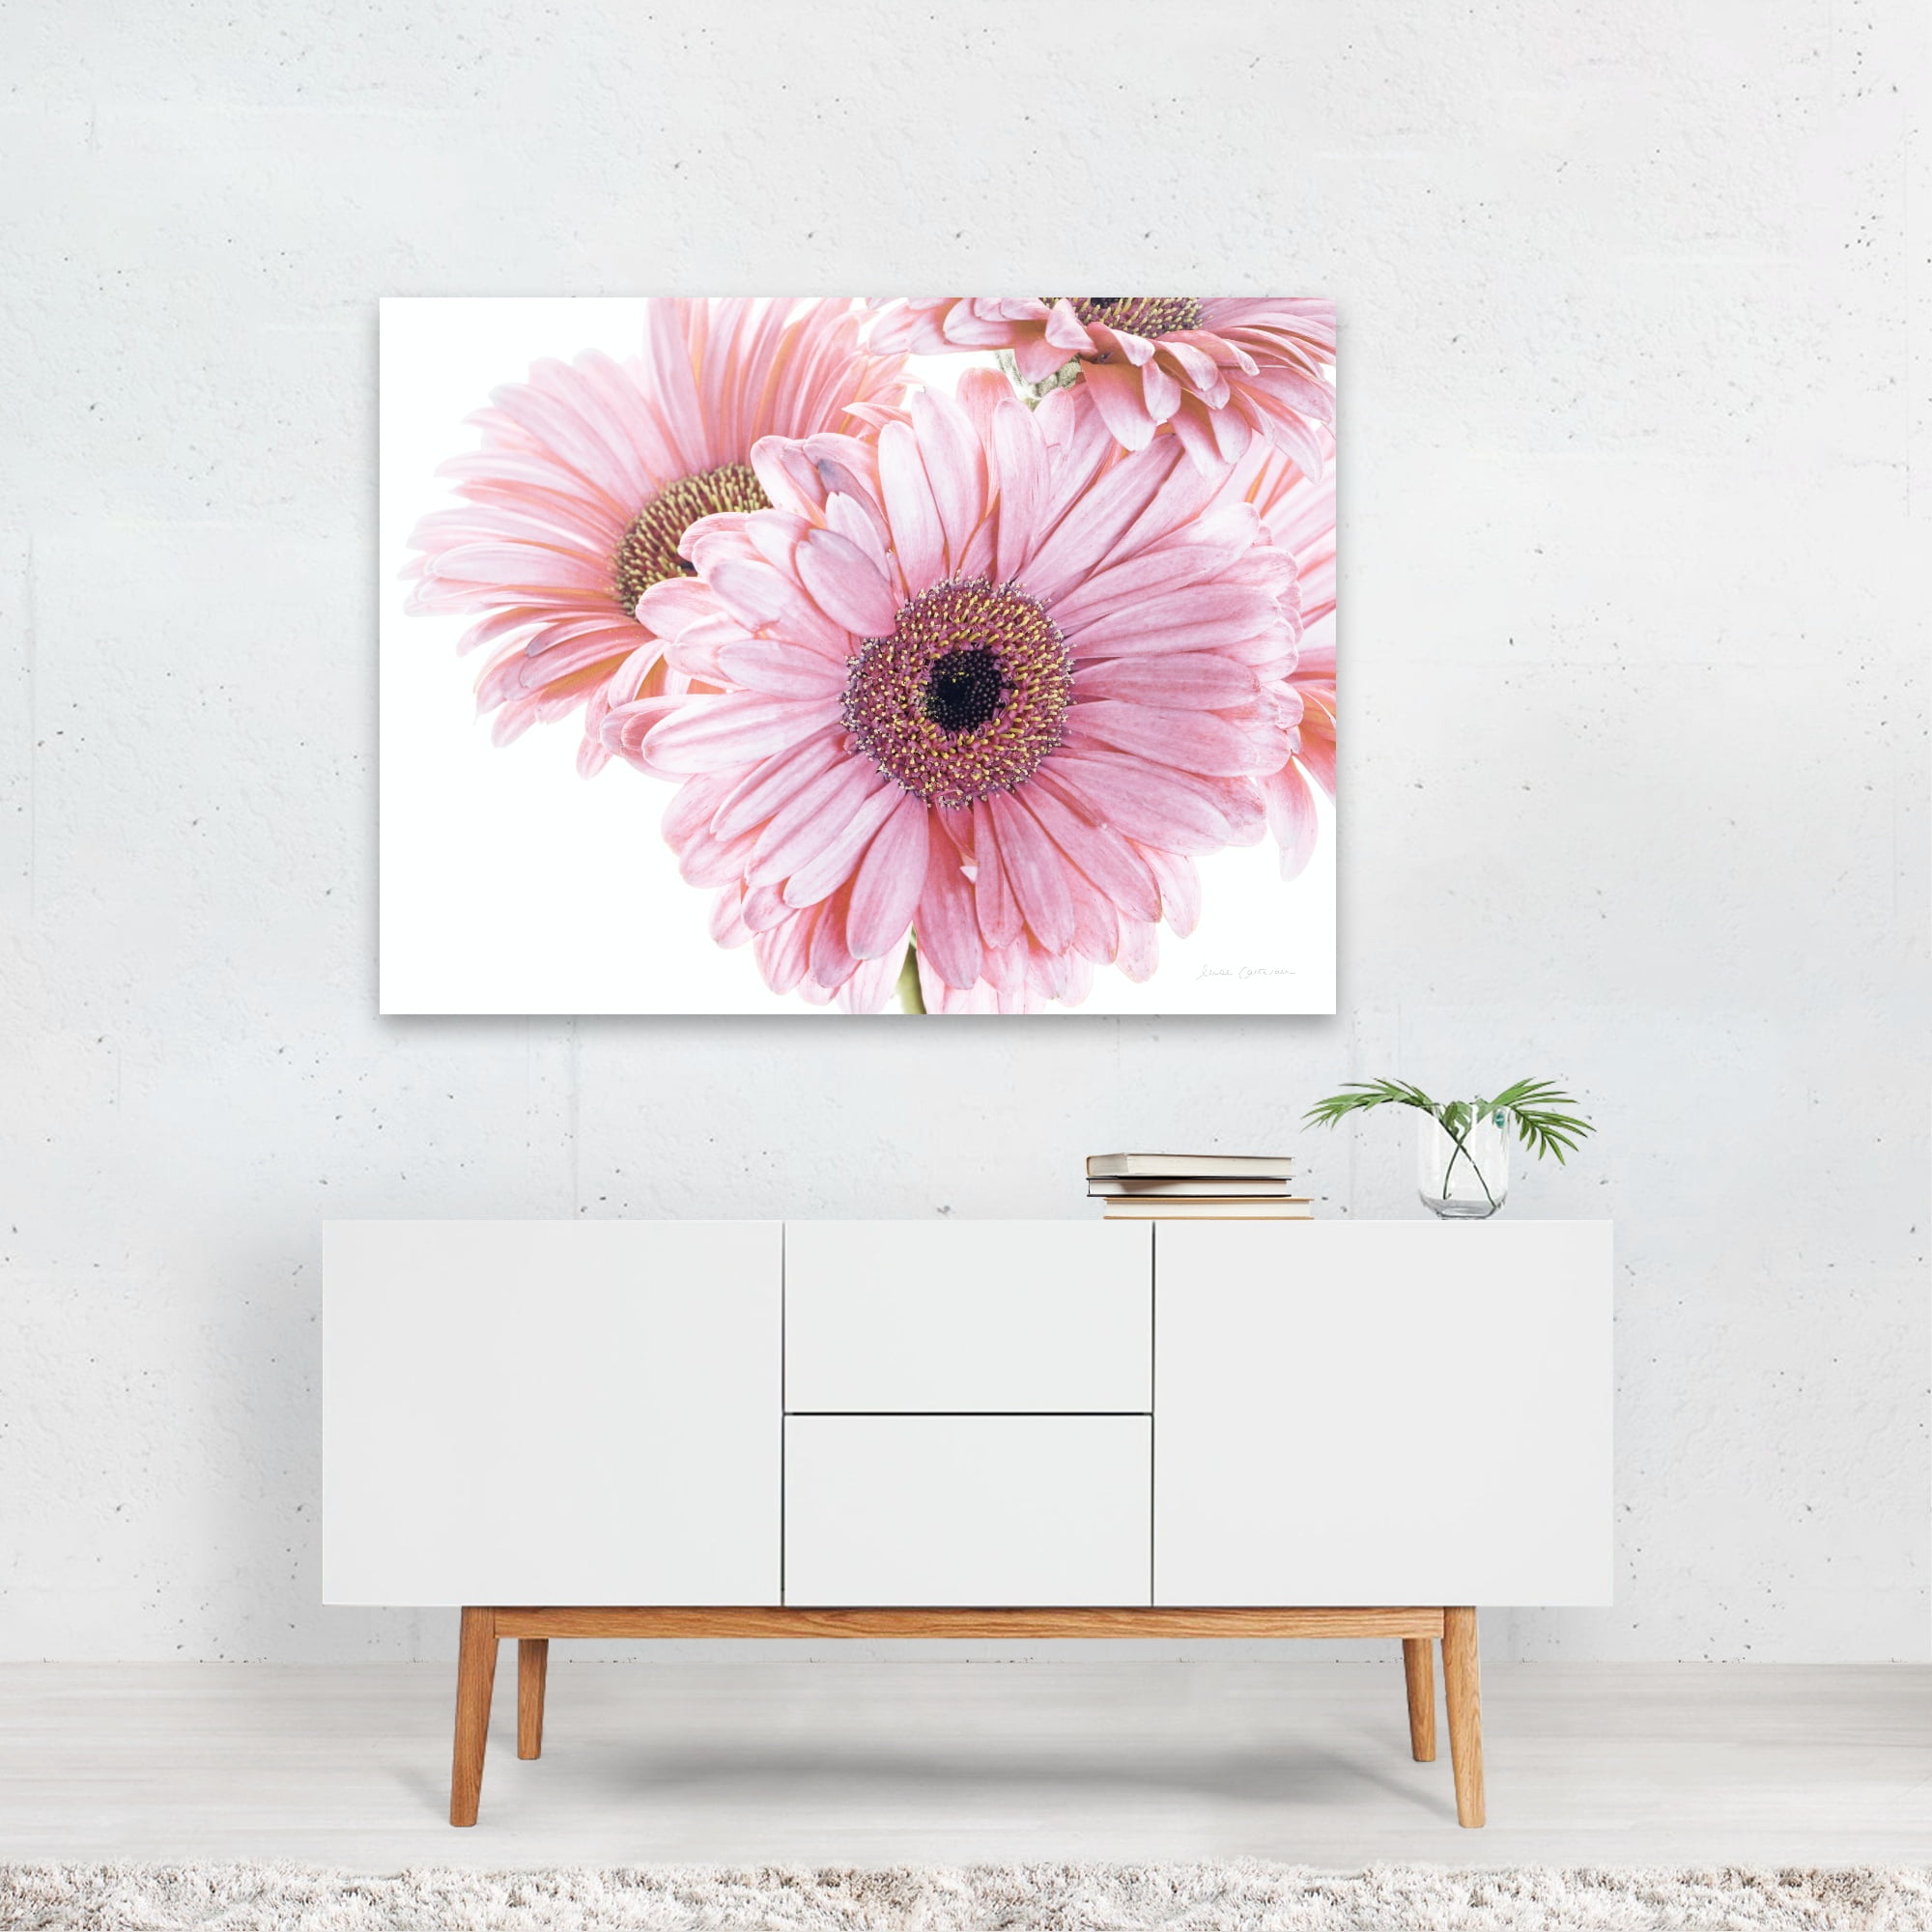 12X PINK GERBERA FLOWERS WALL STICKERS ART DECAL VINYL STICKERS HOME DECORATION